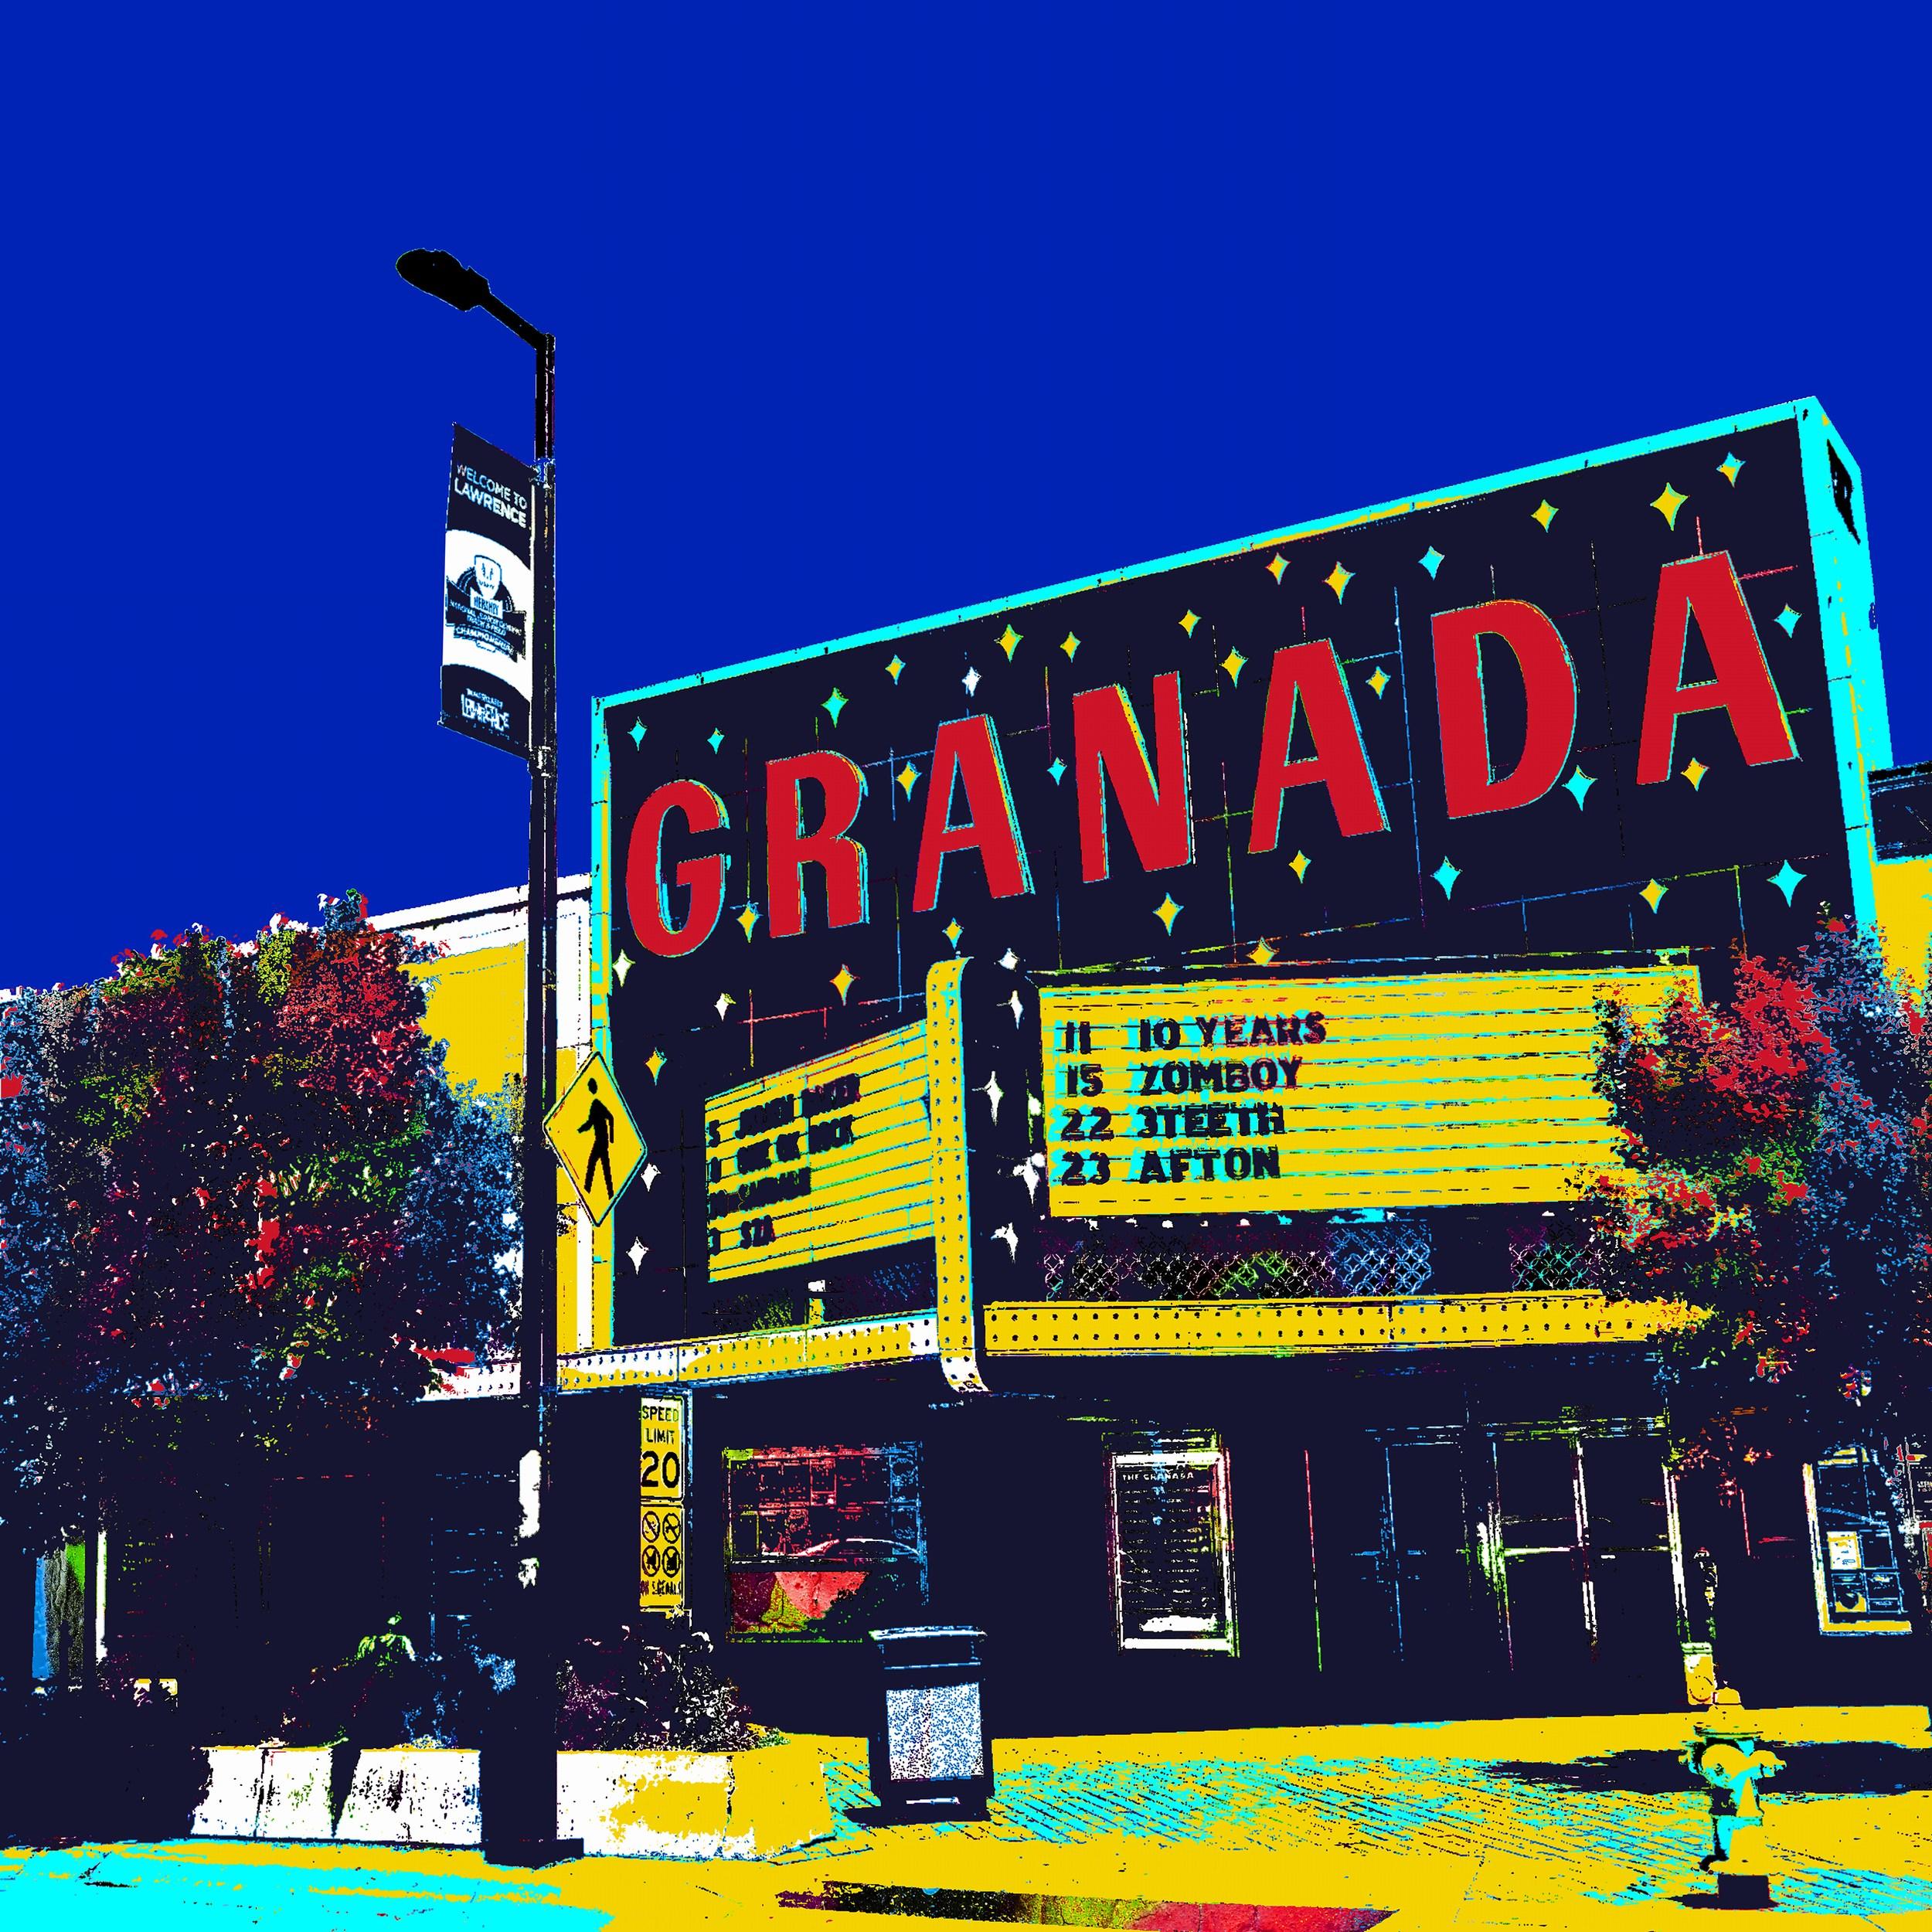 Katrina Revenaugh
“The Granada”
Dye Sublimation Print on Aluminum, 2024
Size Options: 12 x 12 inches, 20 x 20 inches or 30 x 30 inches
Edition: 75 + AP
Signed and titled on label provided separately
COA included

Tags: #ArtisticExpression